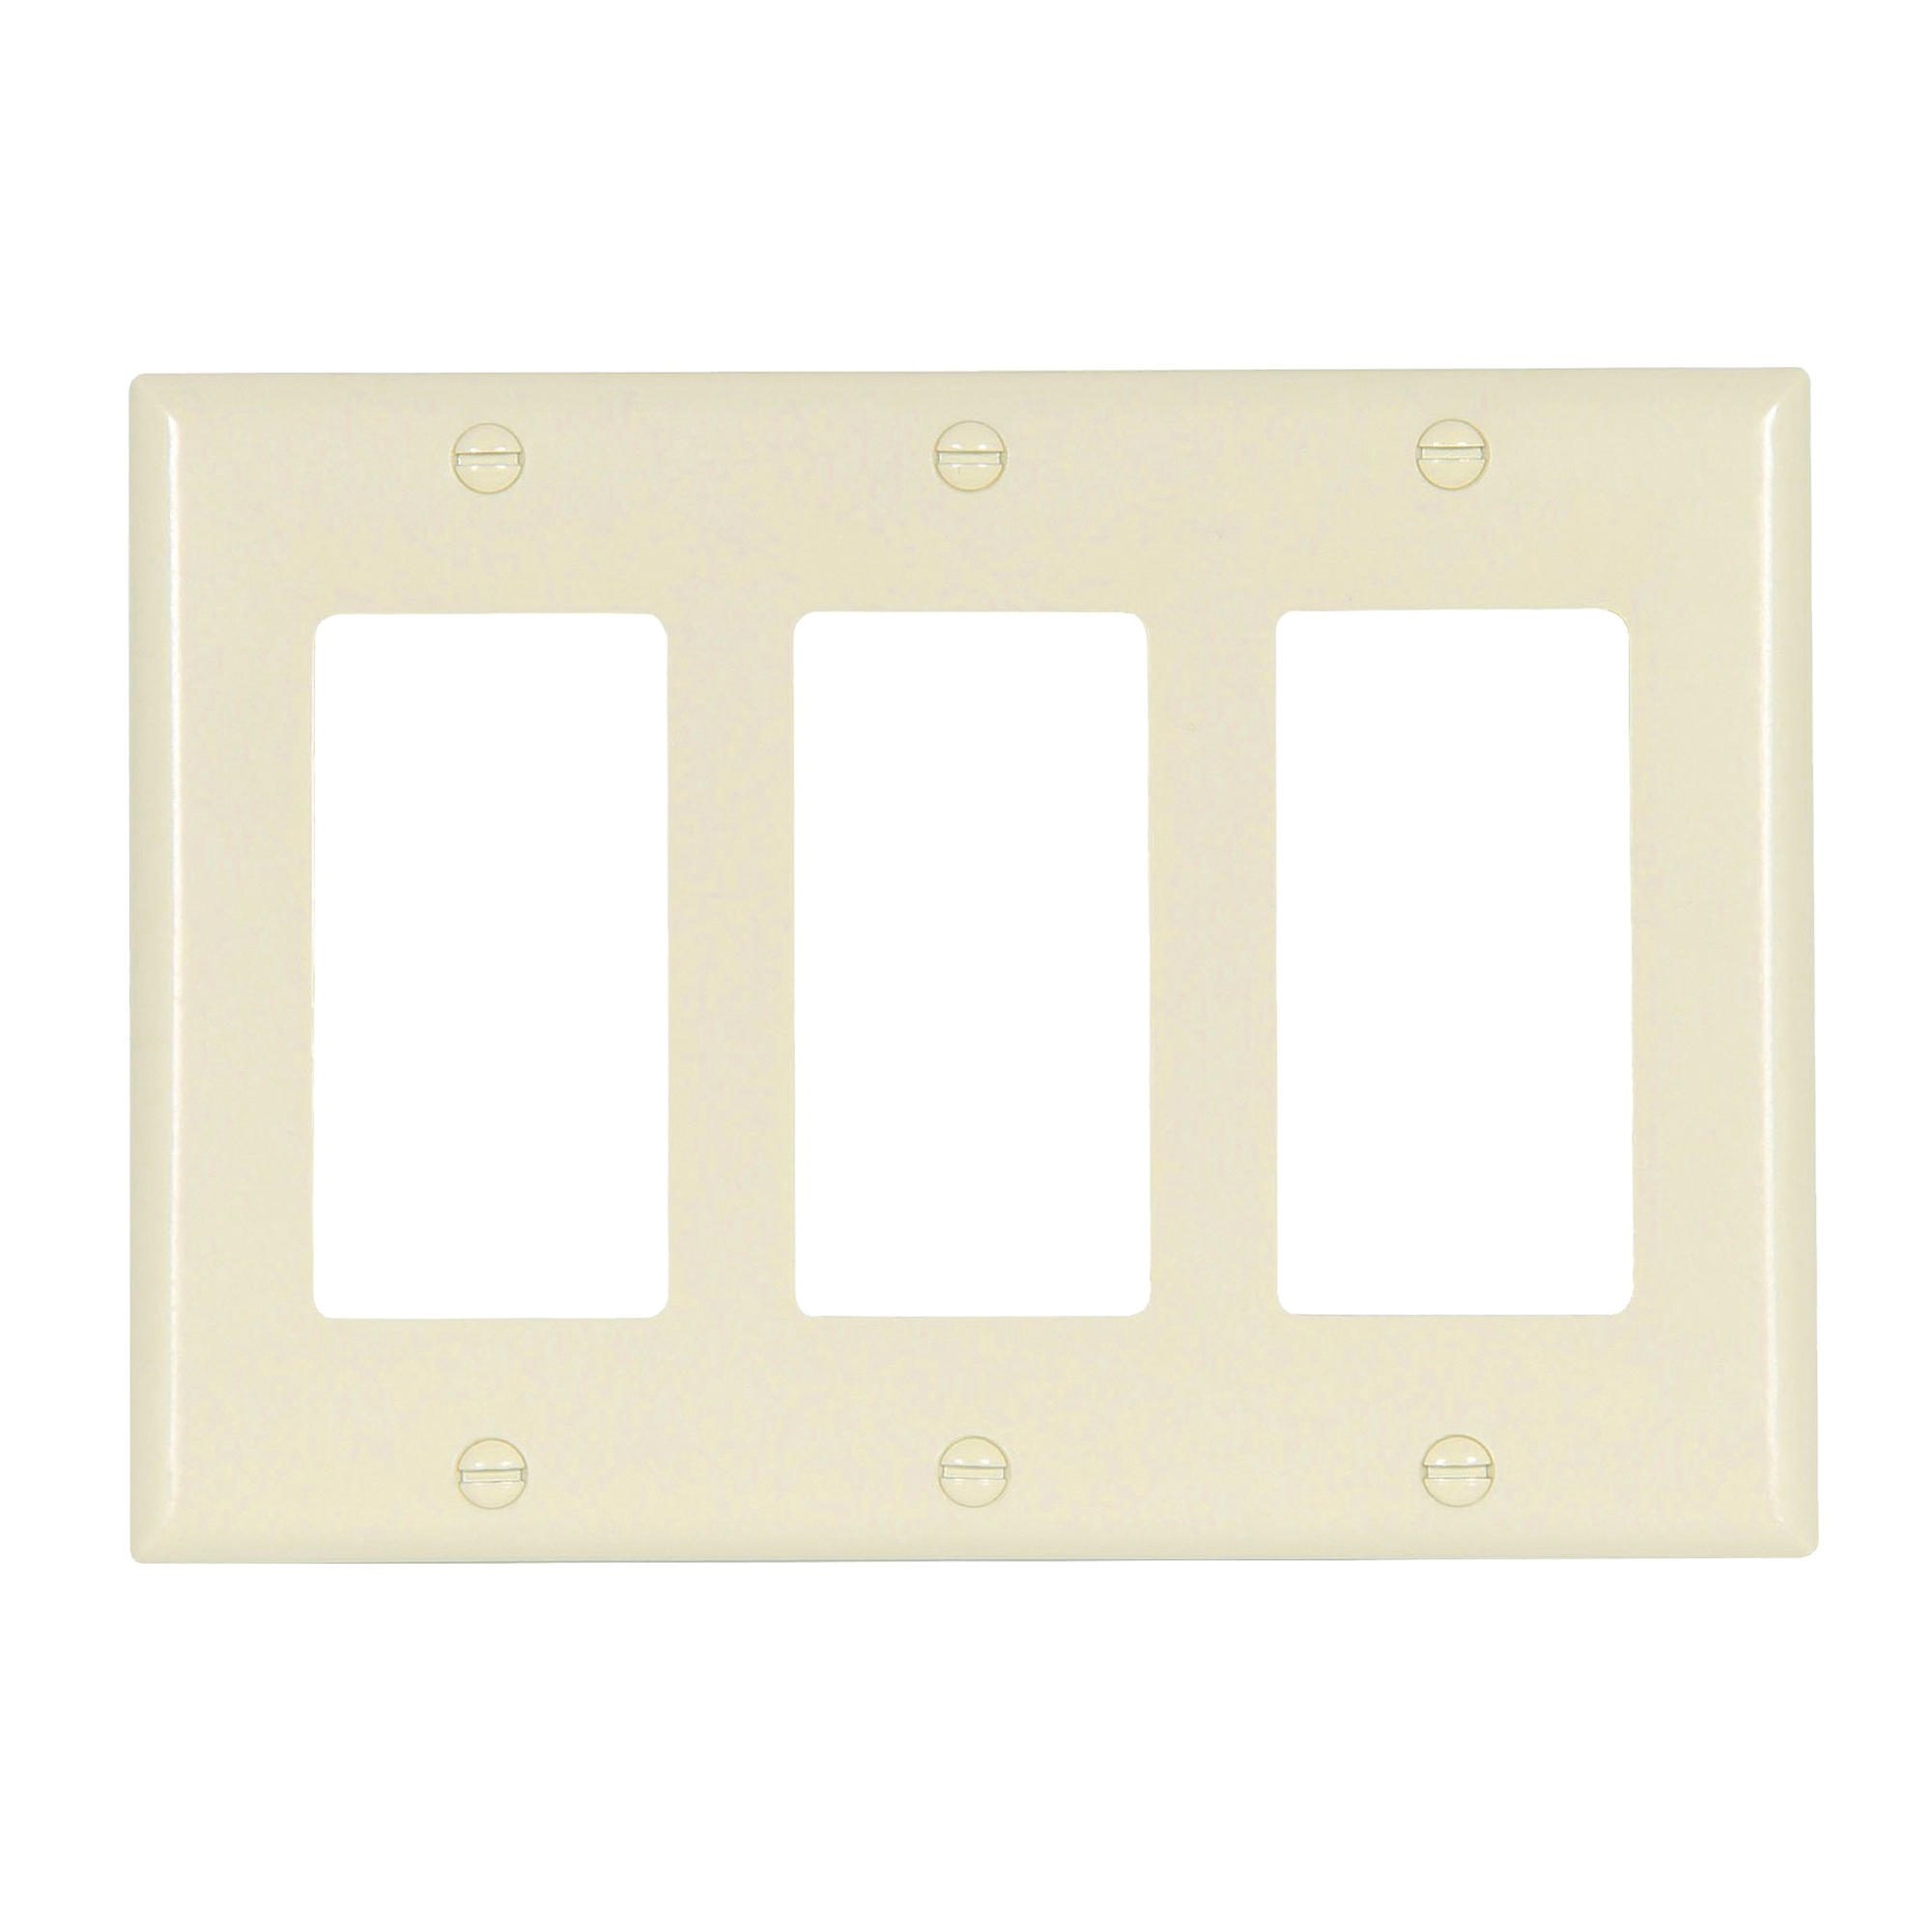 2163 2163LA-BOX Wallplate, 4-1/2 in L, 6.37 in W, 3 -Gang, Thermoset, Light Almond, High-Gloss